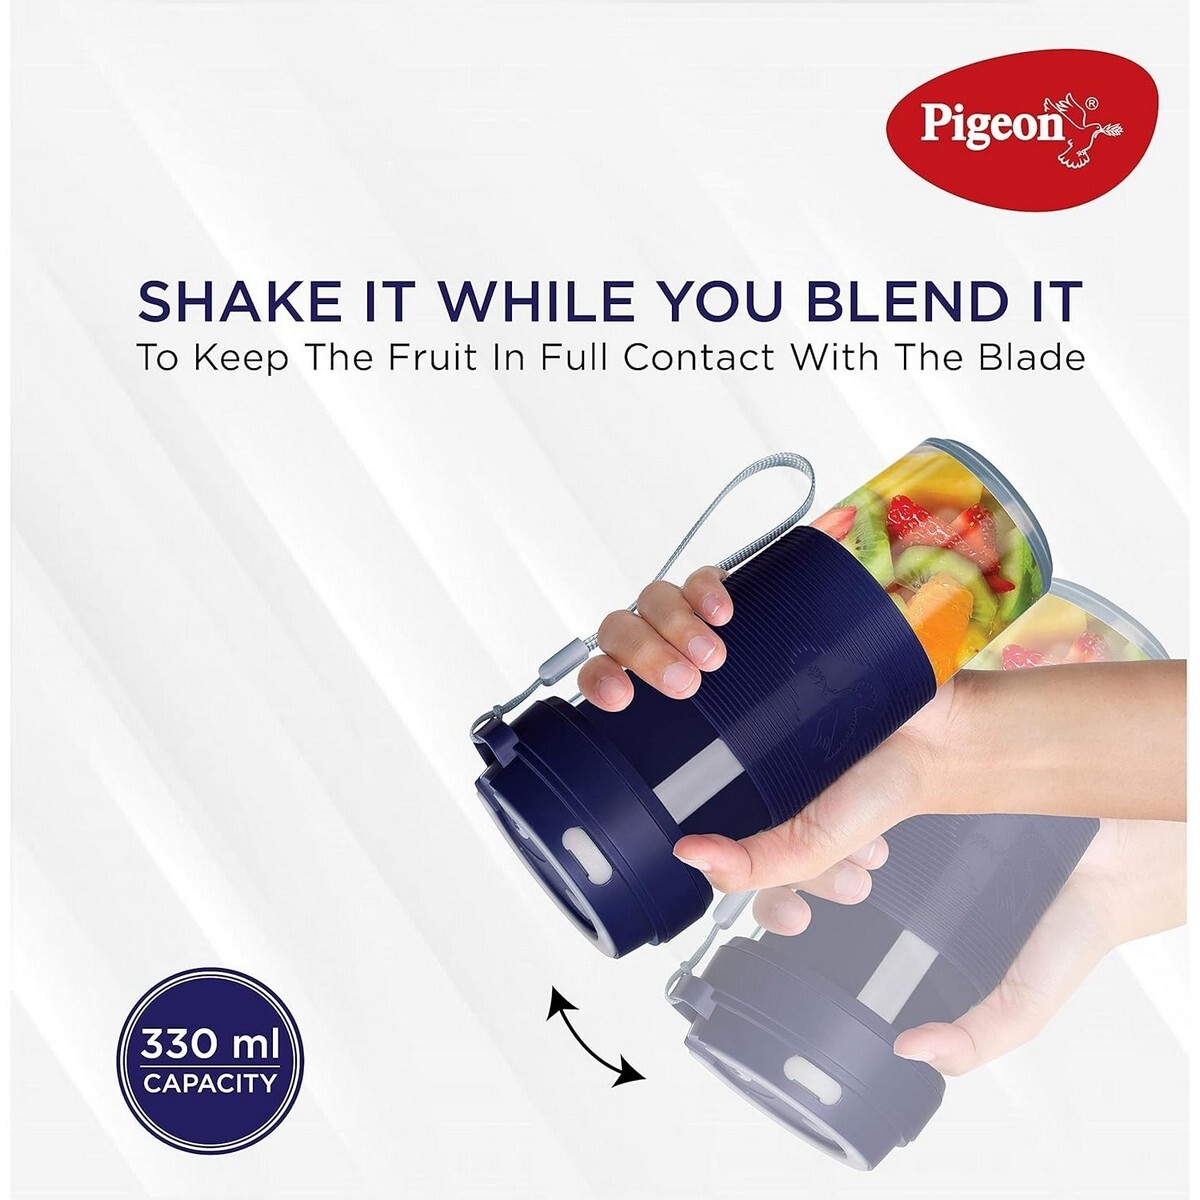 Pigeon Blendo-Personal Blender with Juicer Cup Jar,330 ml (USB rechargeable)